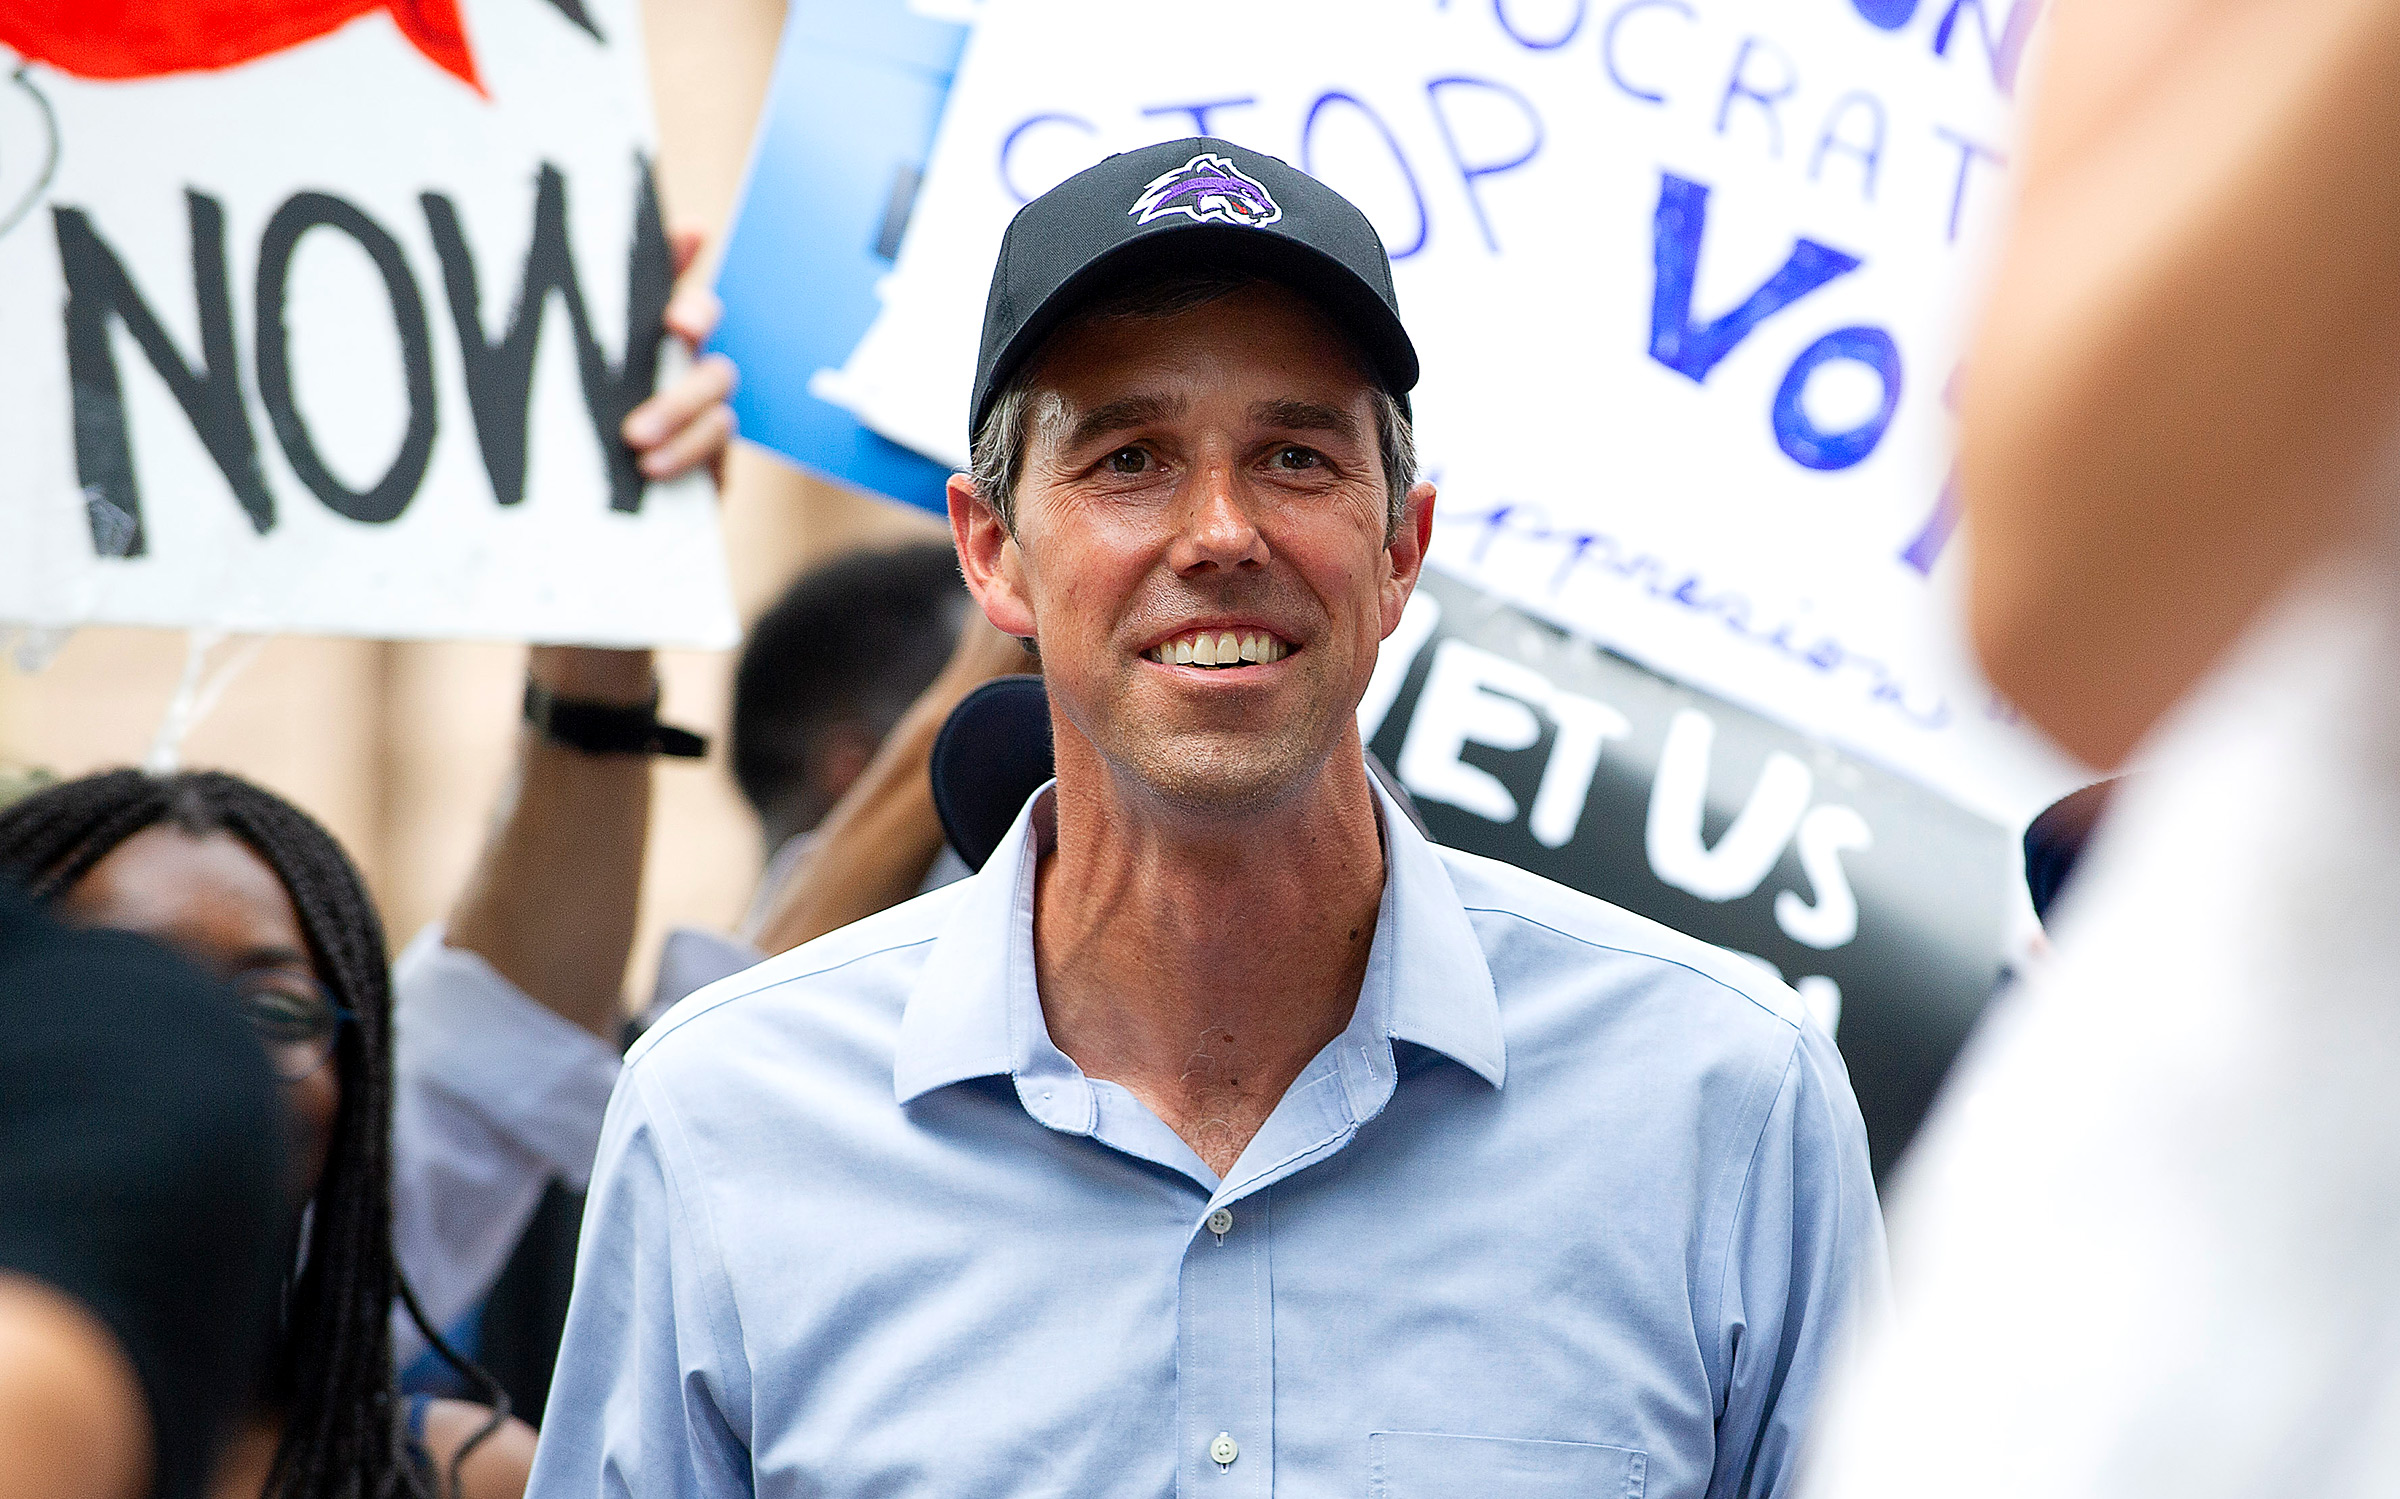 Beto ORourke Is Running for Governor